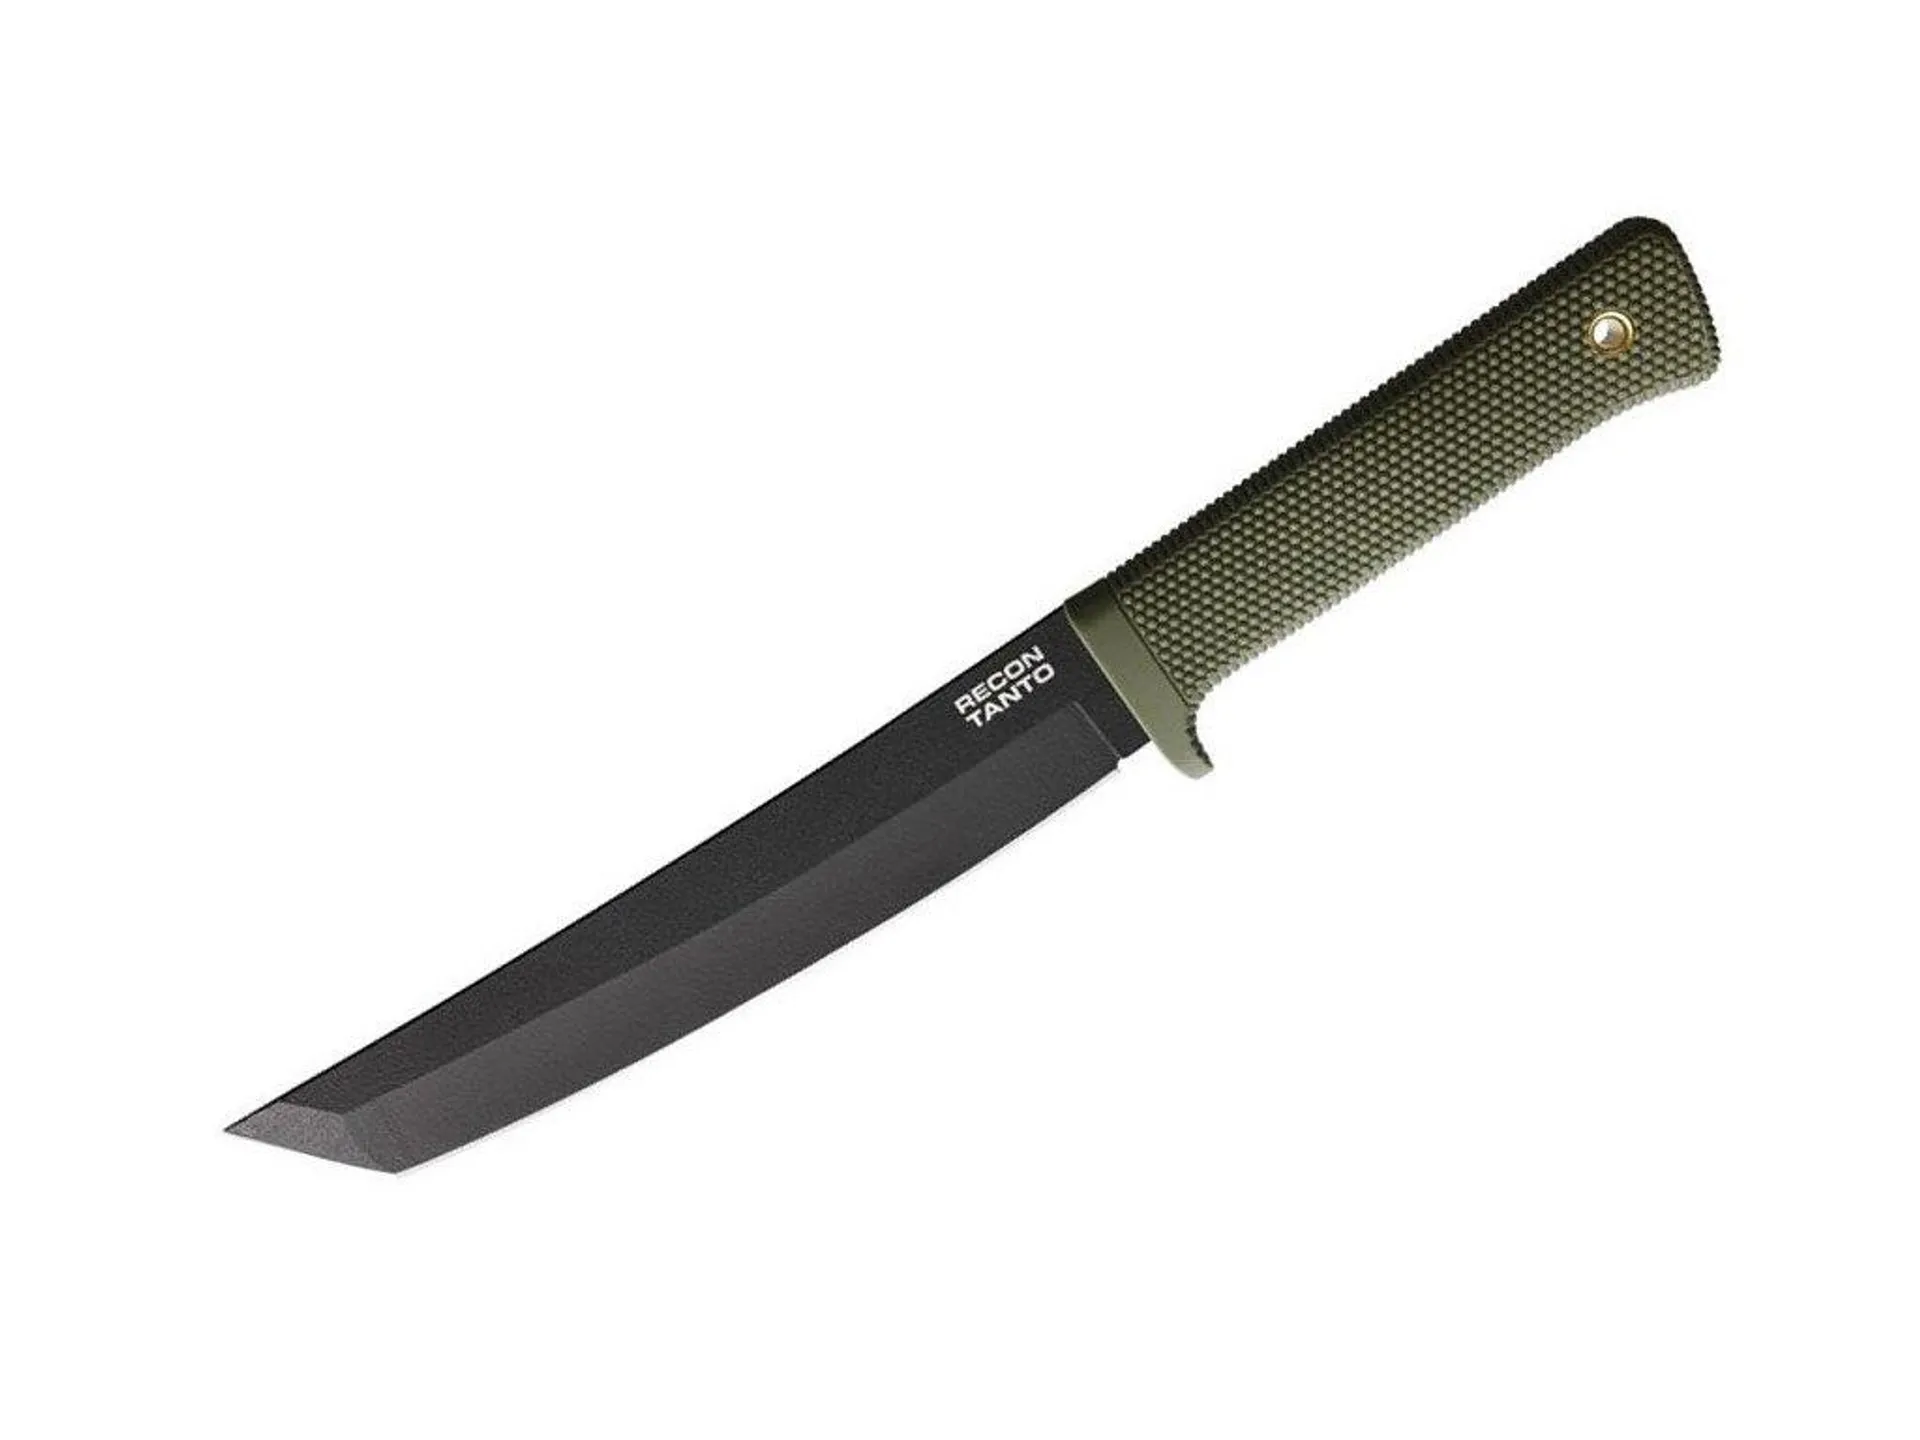 Cold Steel Recon Tanto Olive Drab fekete kés